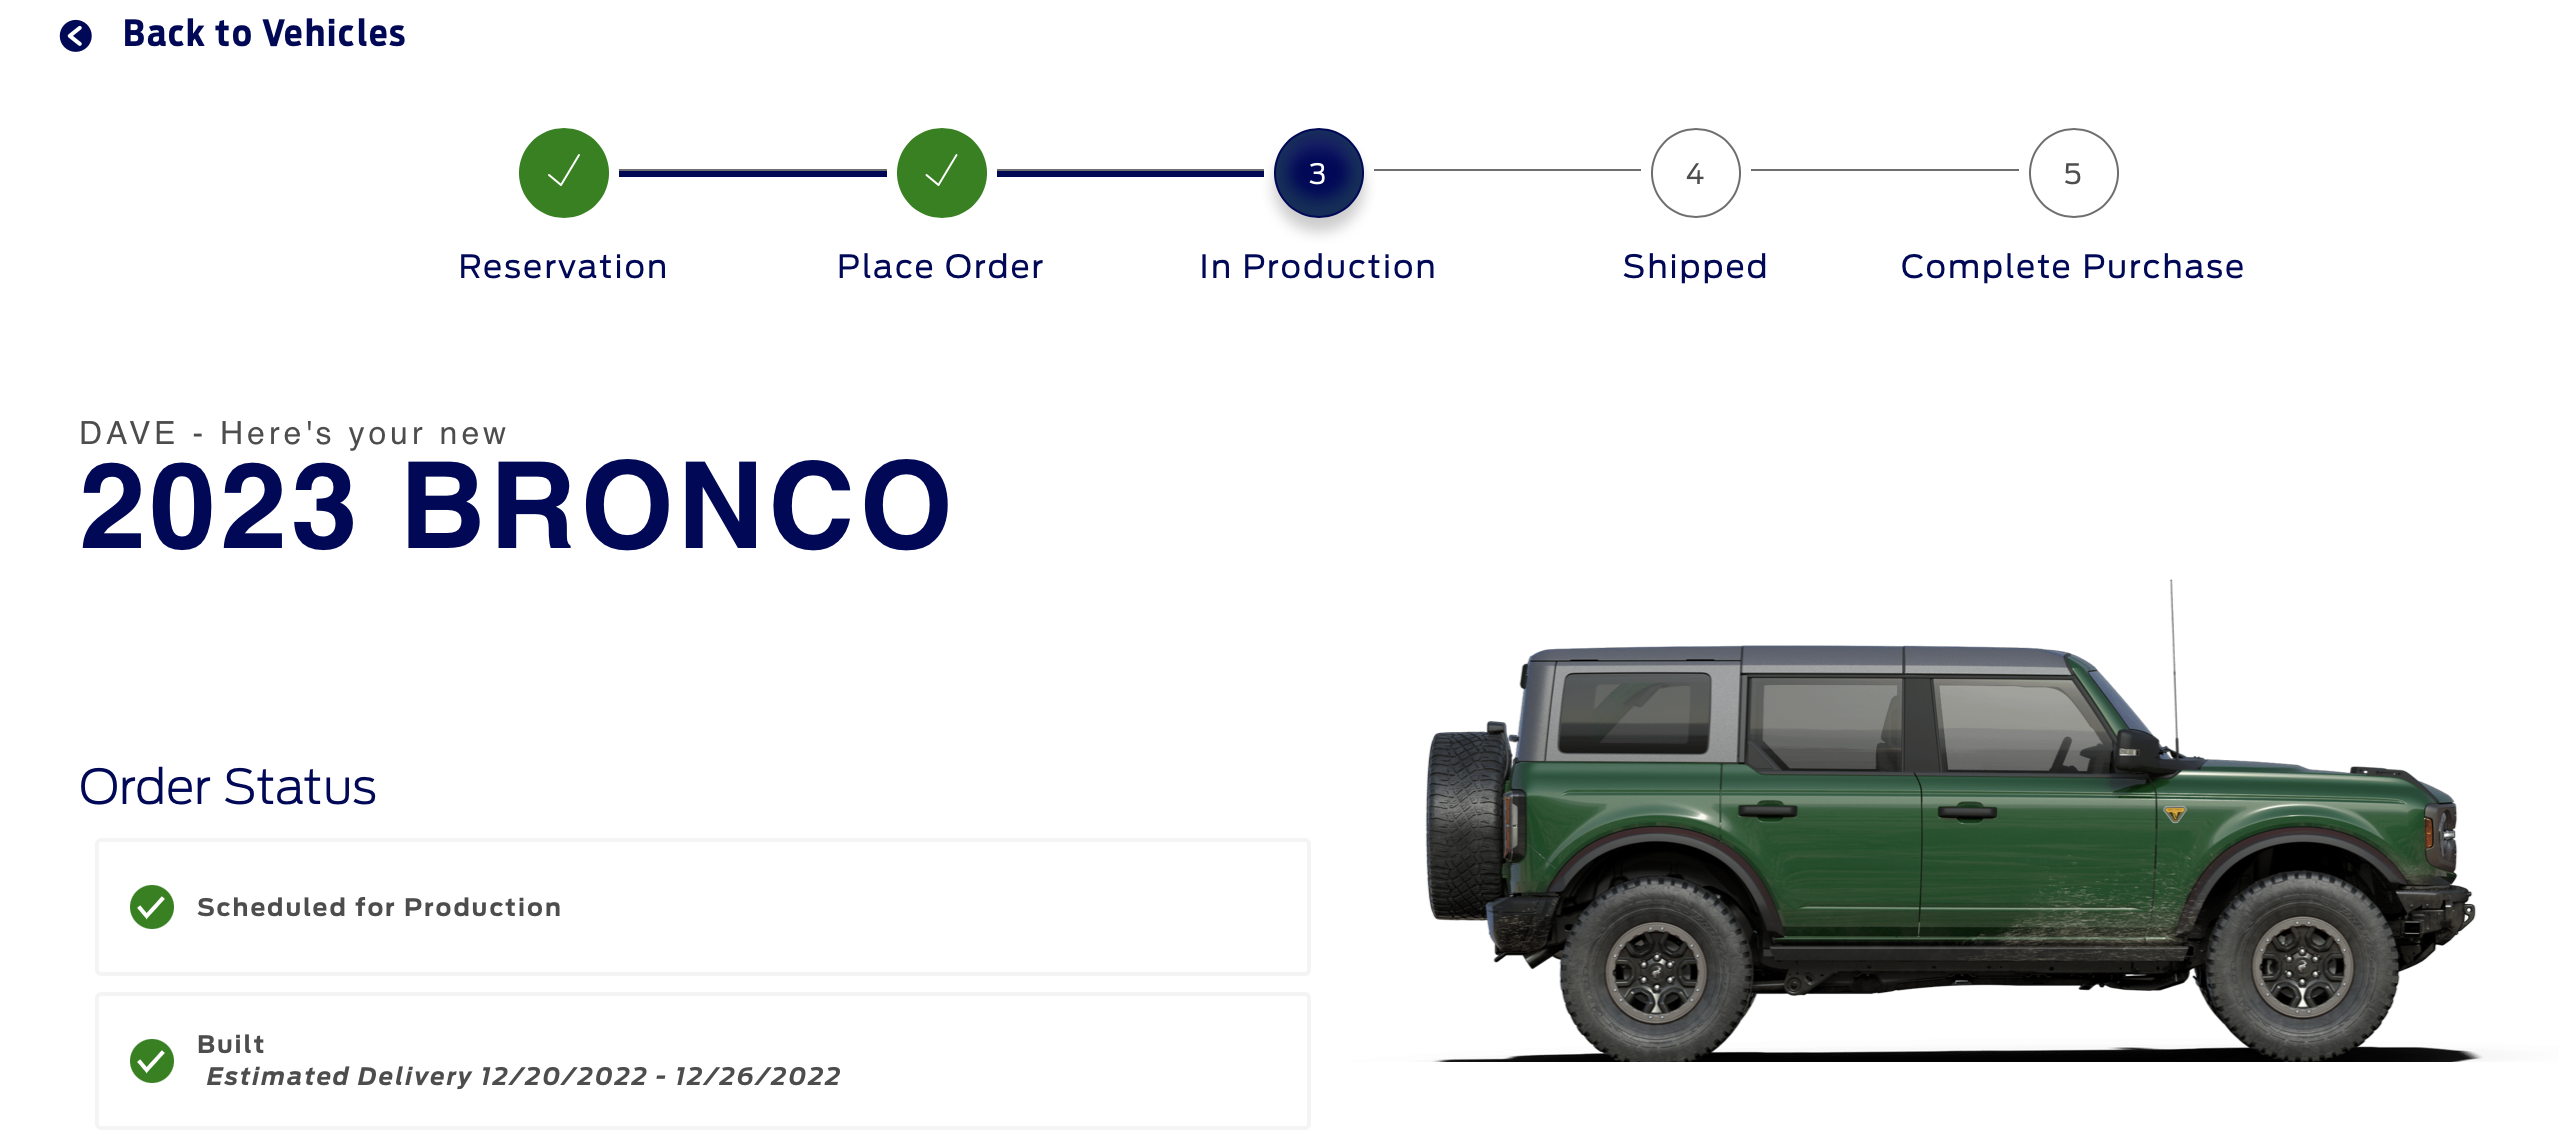 Ford Bronco The End of Ordertrack - Explained Screen Shot 2022-12-12 at 2.19.22 PM